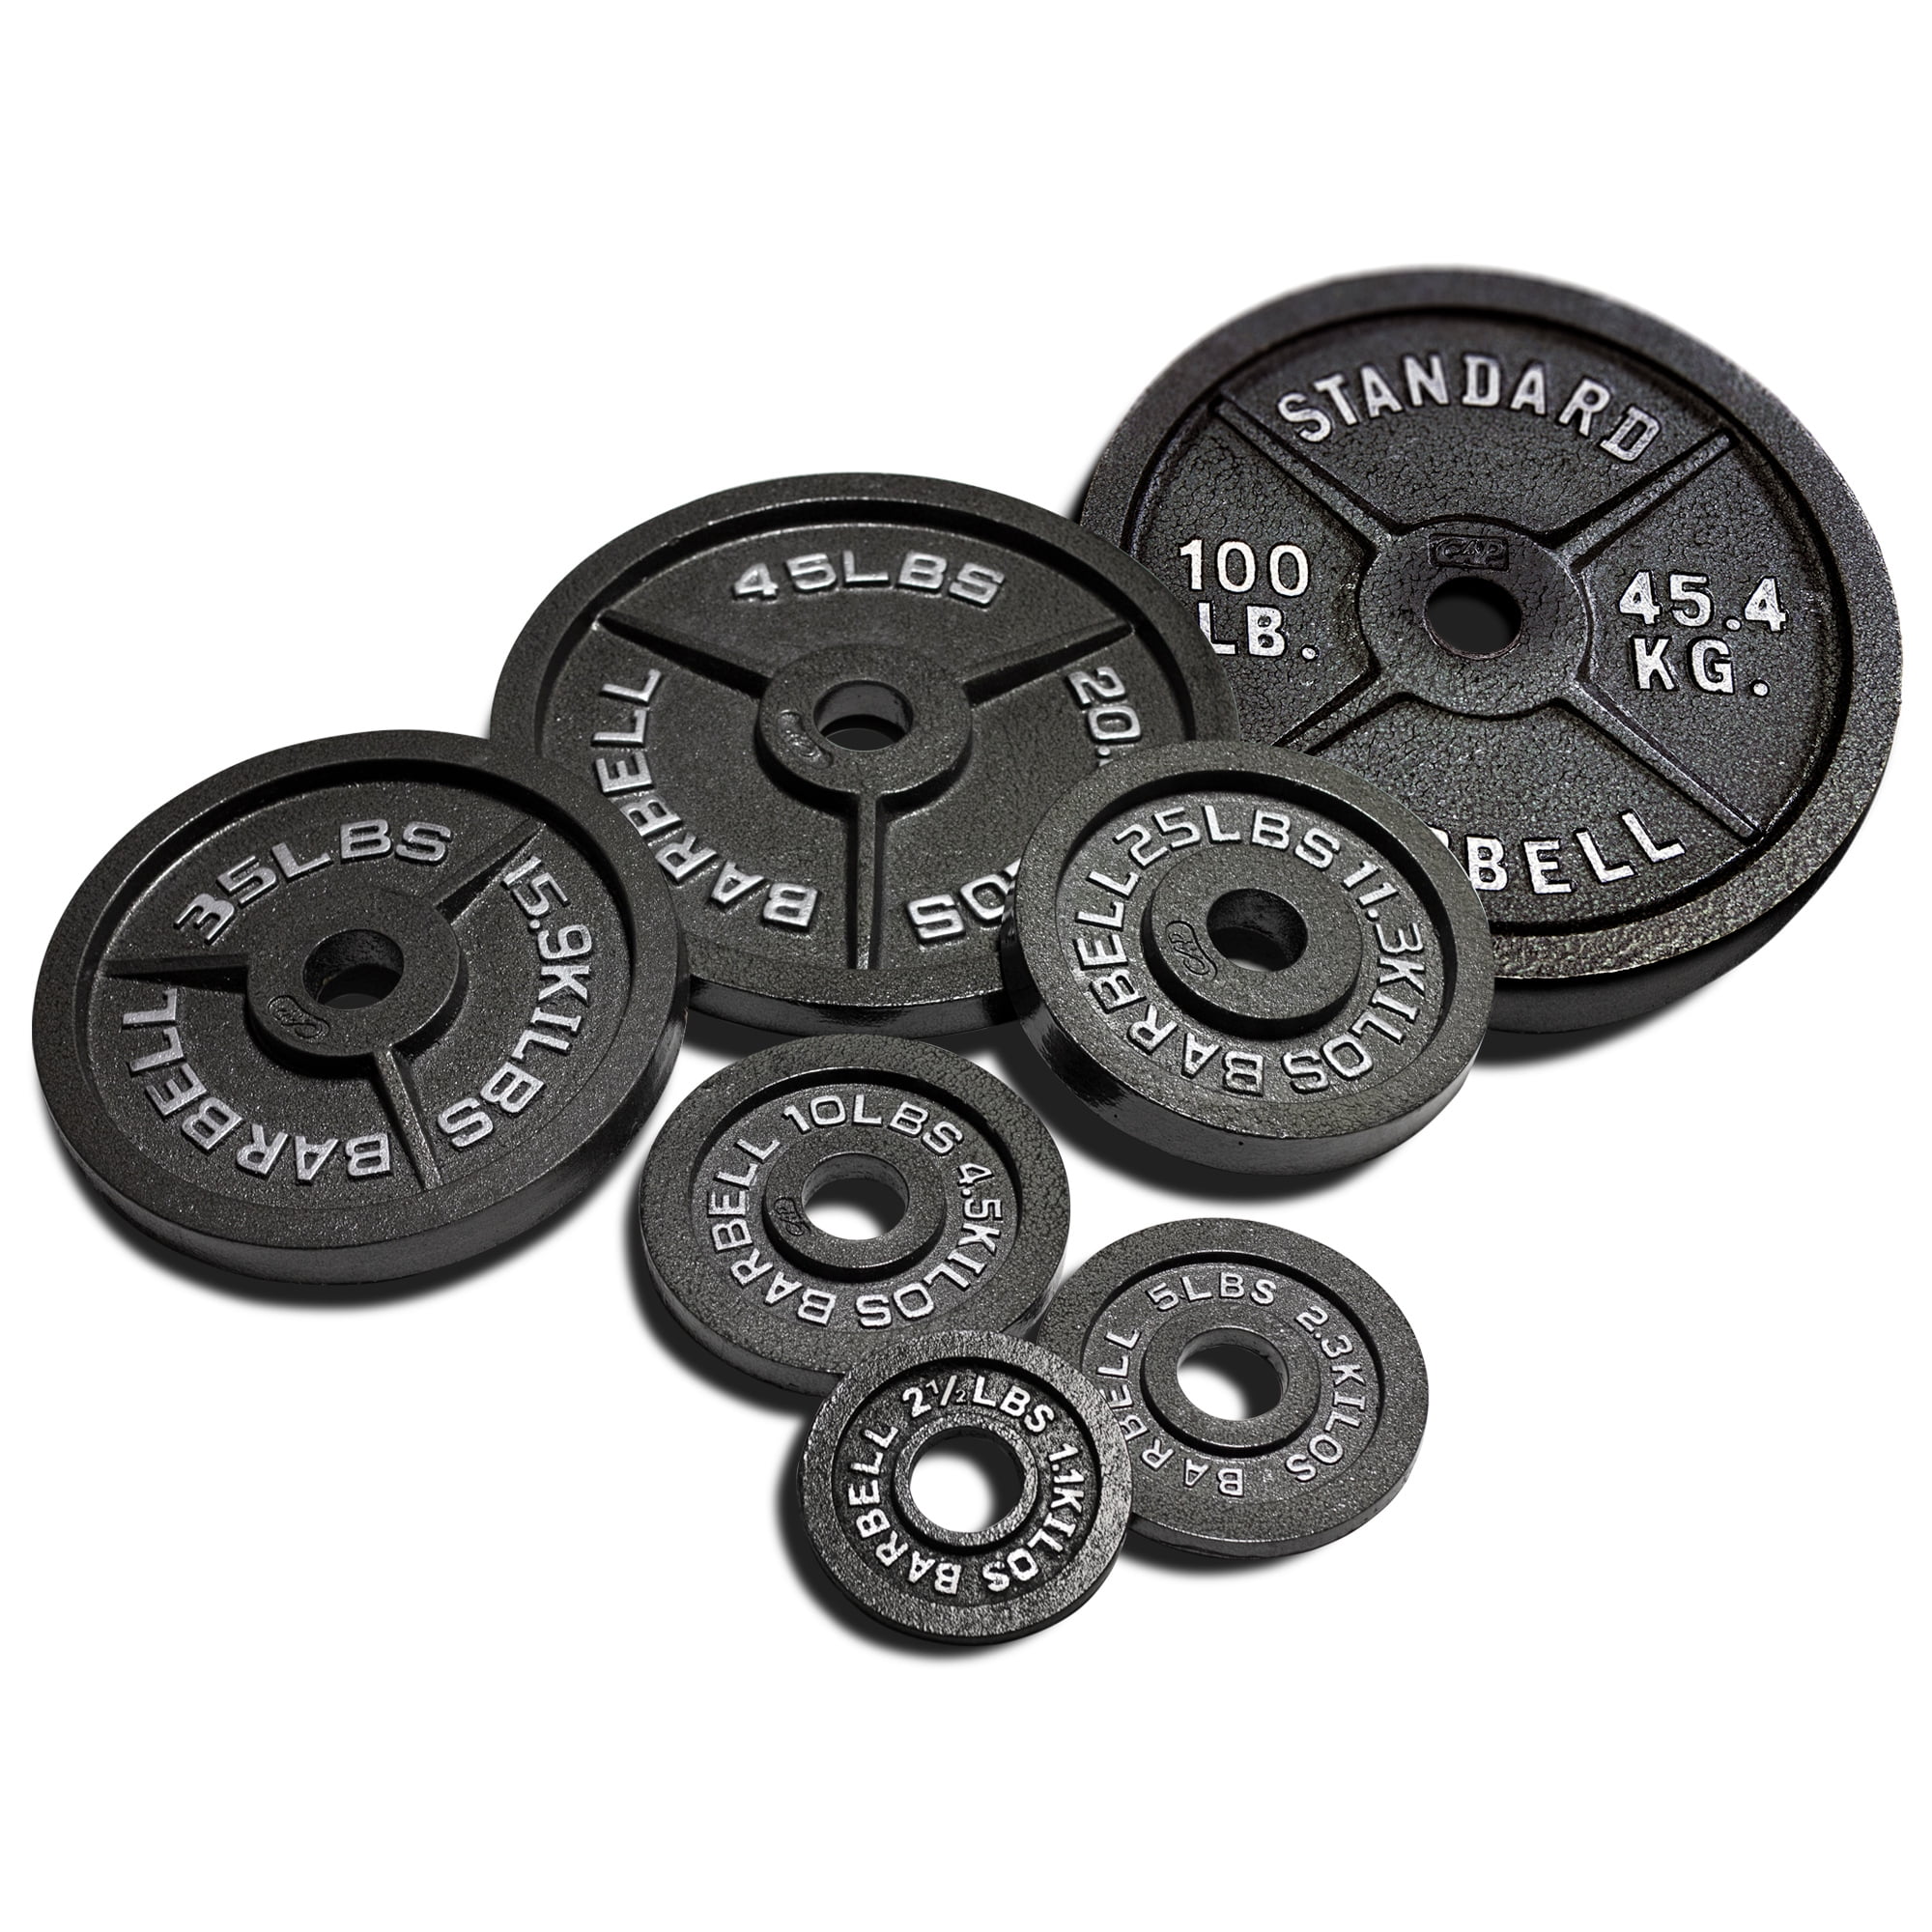 CAP 25 LB Cast Iron Barbell Standard Weightlifting Plate Single Plate Only 